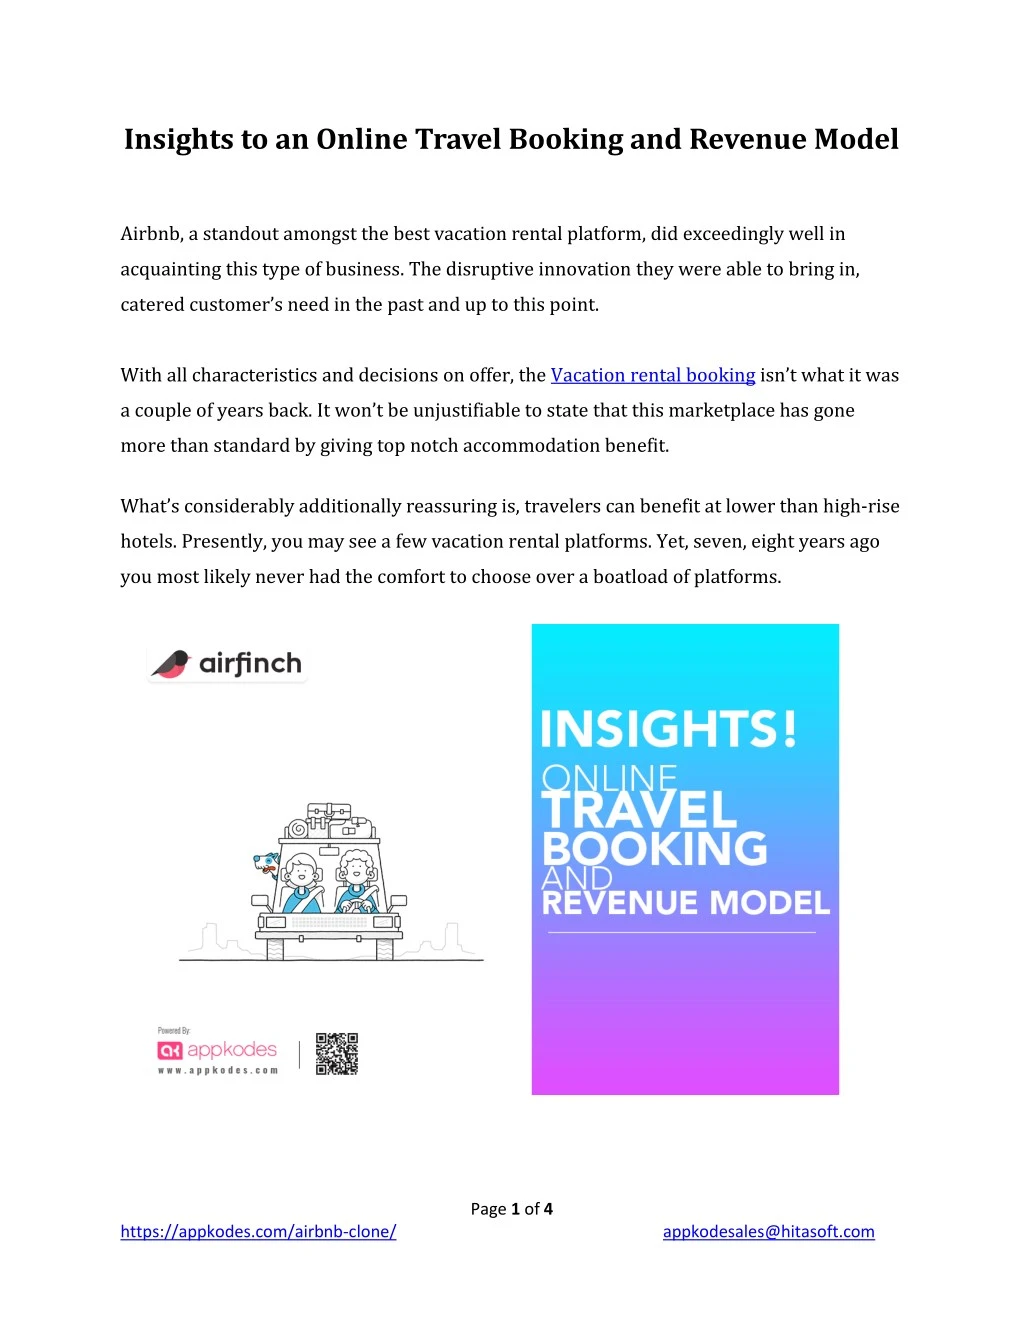 insights to an online travel booking and revenue